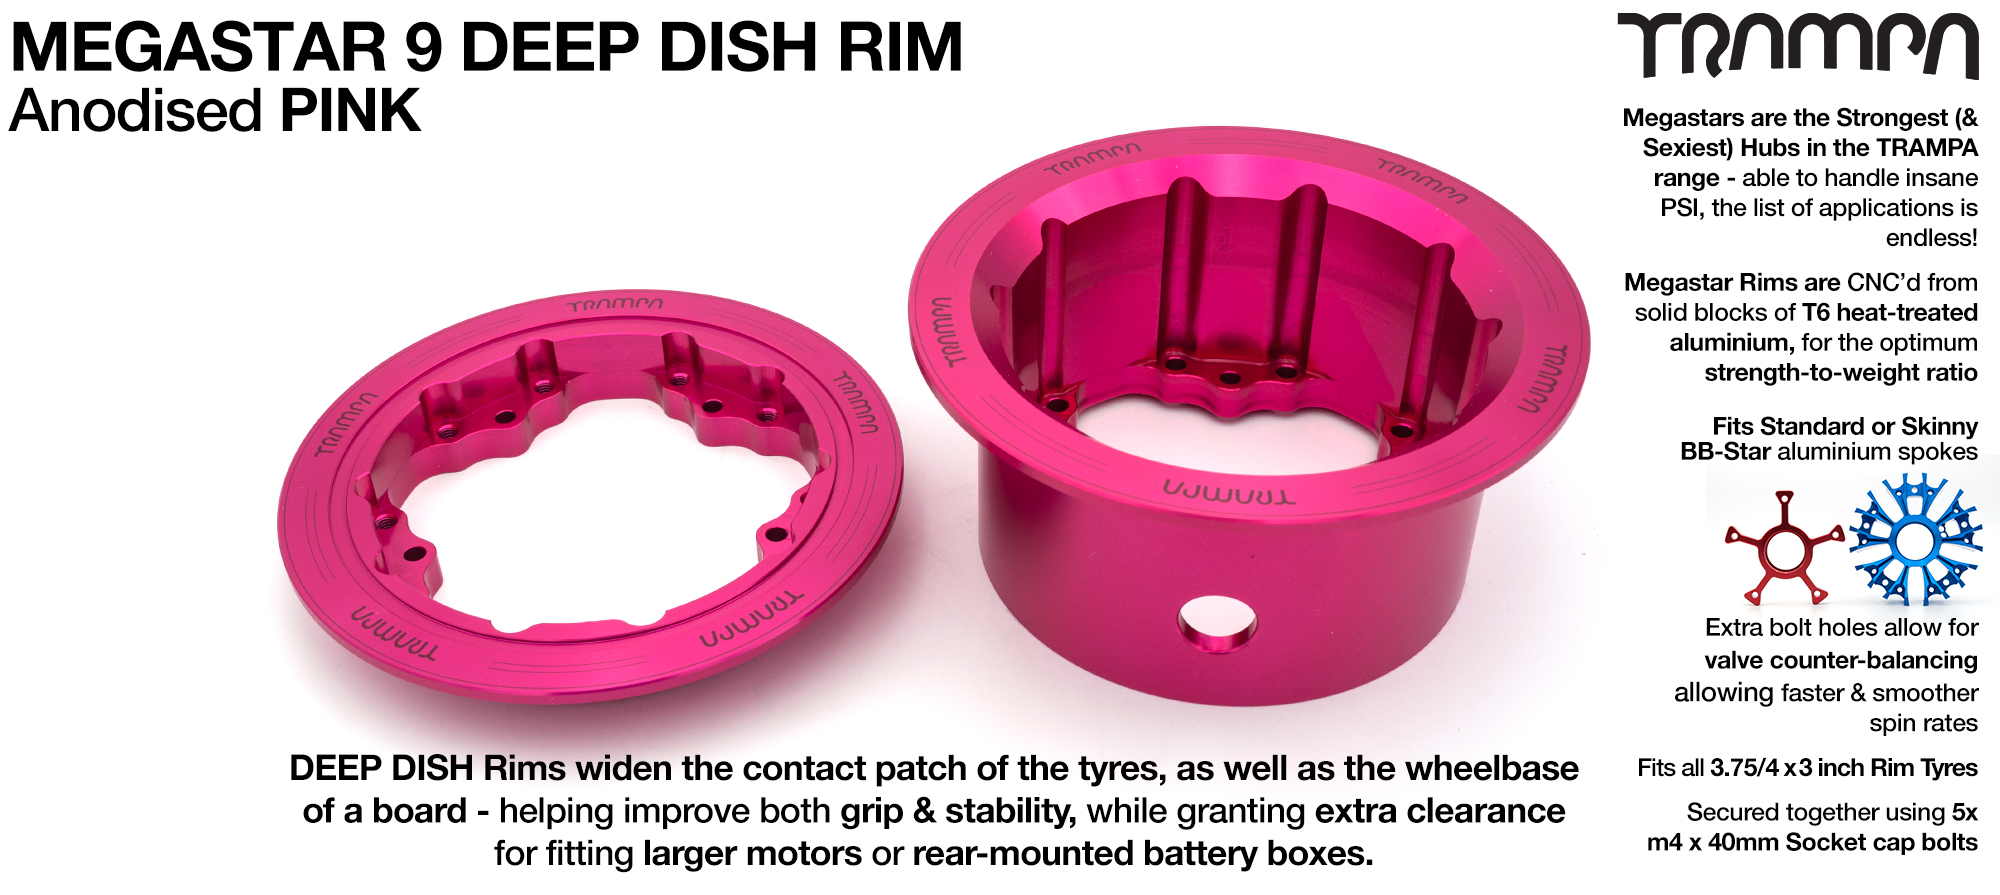 MEGASTAR 9 DEEP-DISH Rims Measure 3.75/4x 3 Inch. The Bearings are positioned OFF-SET & accept 4 Inch Rim Tyres to make 9 or 10 inch Wheels - PINK